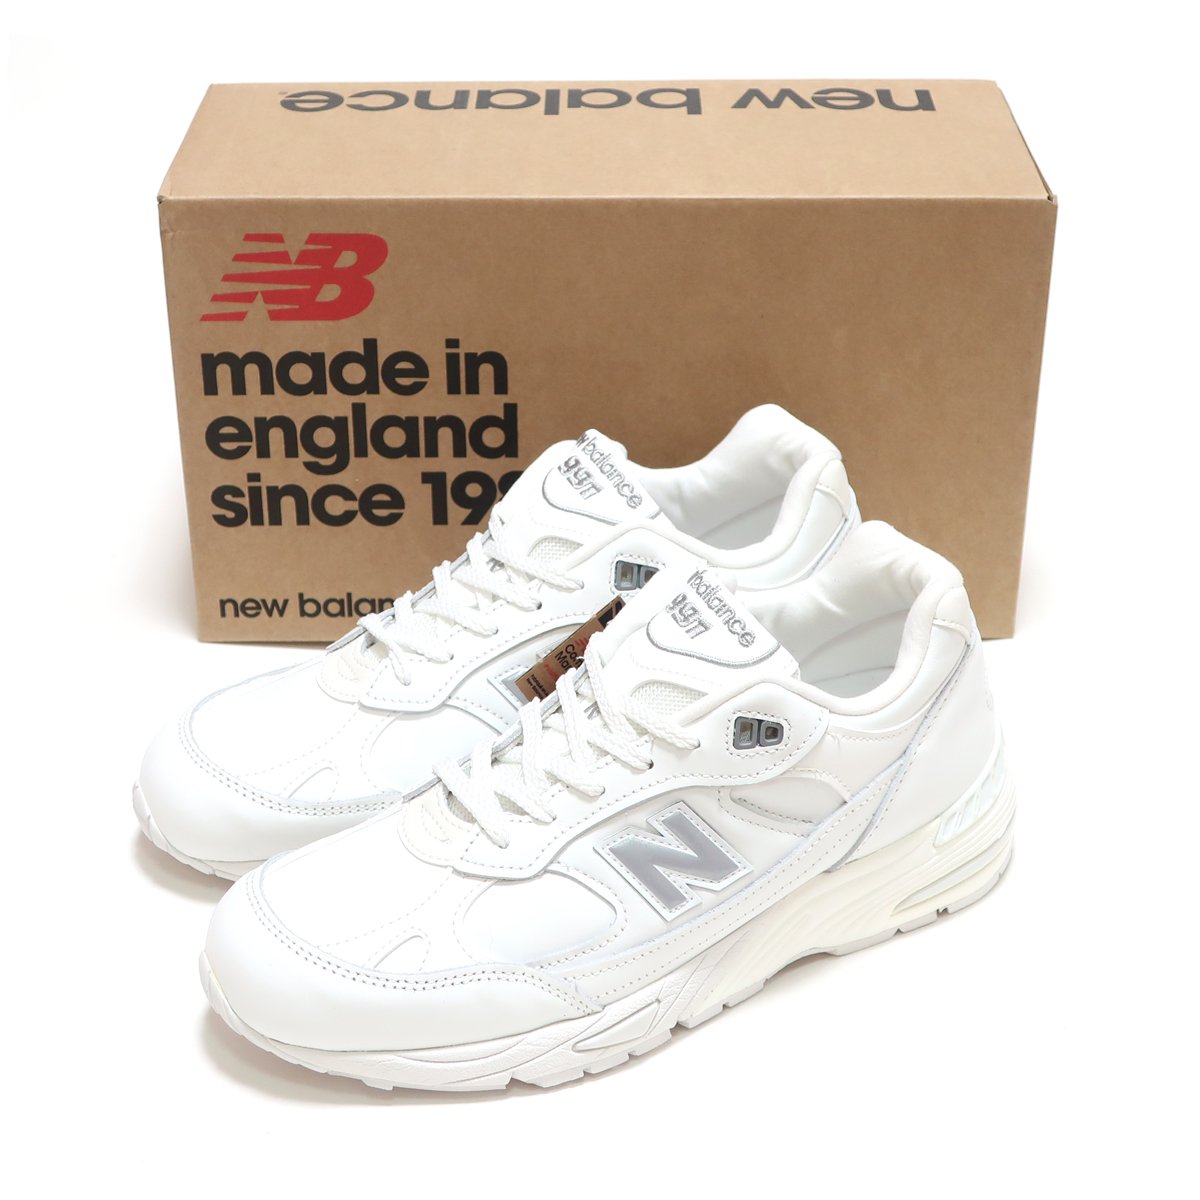 NEW BALANCE M991TW TRIPLE WHITE LEATHER MADE IN ENGLAND ...